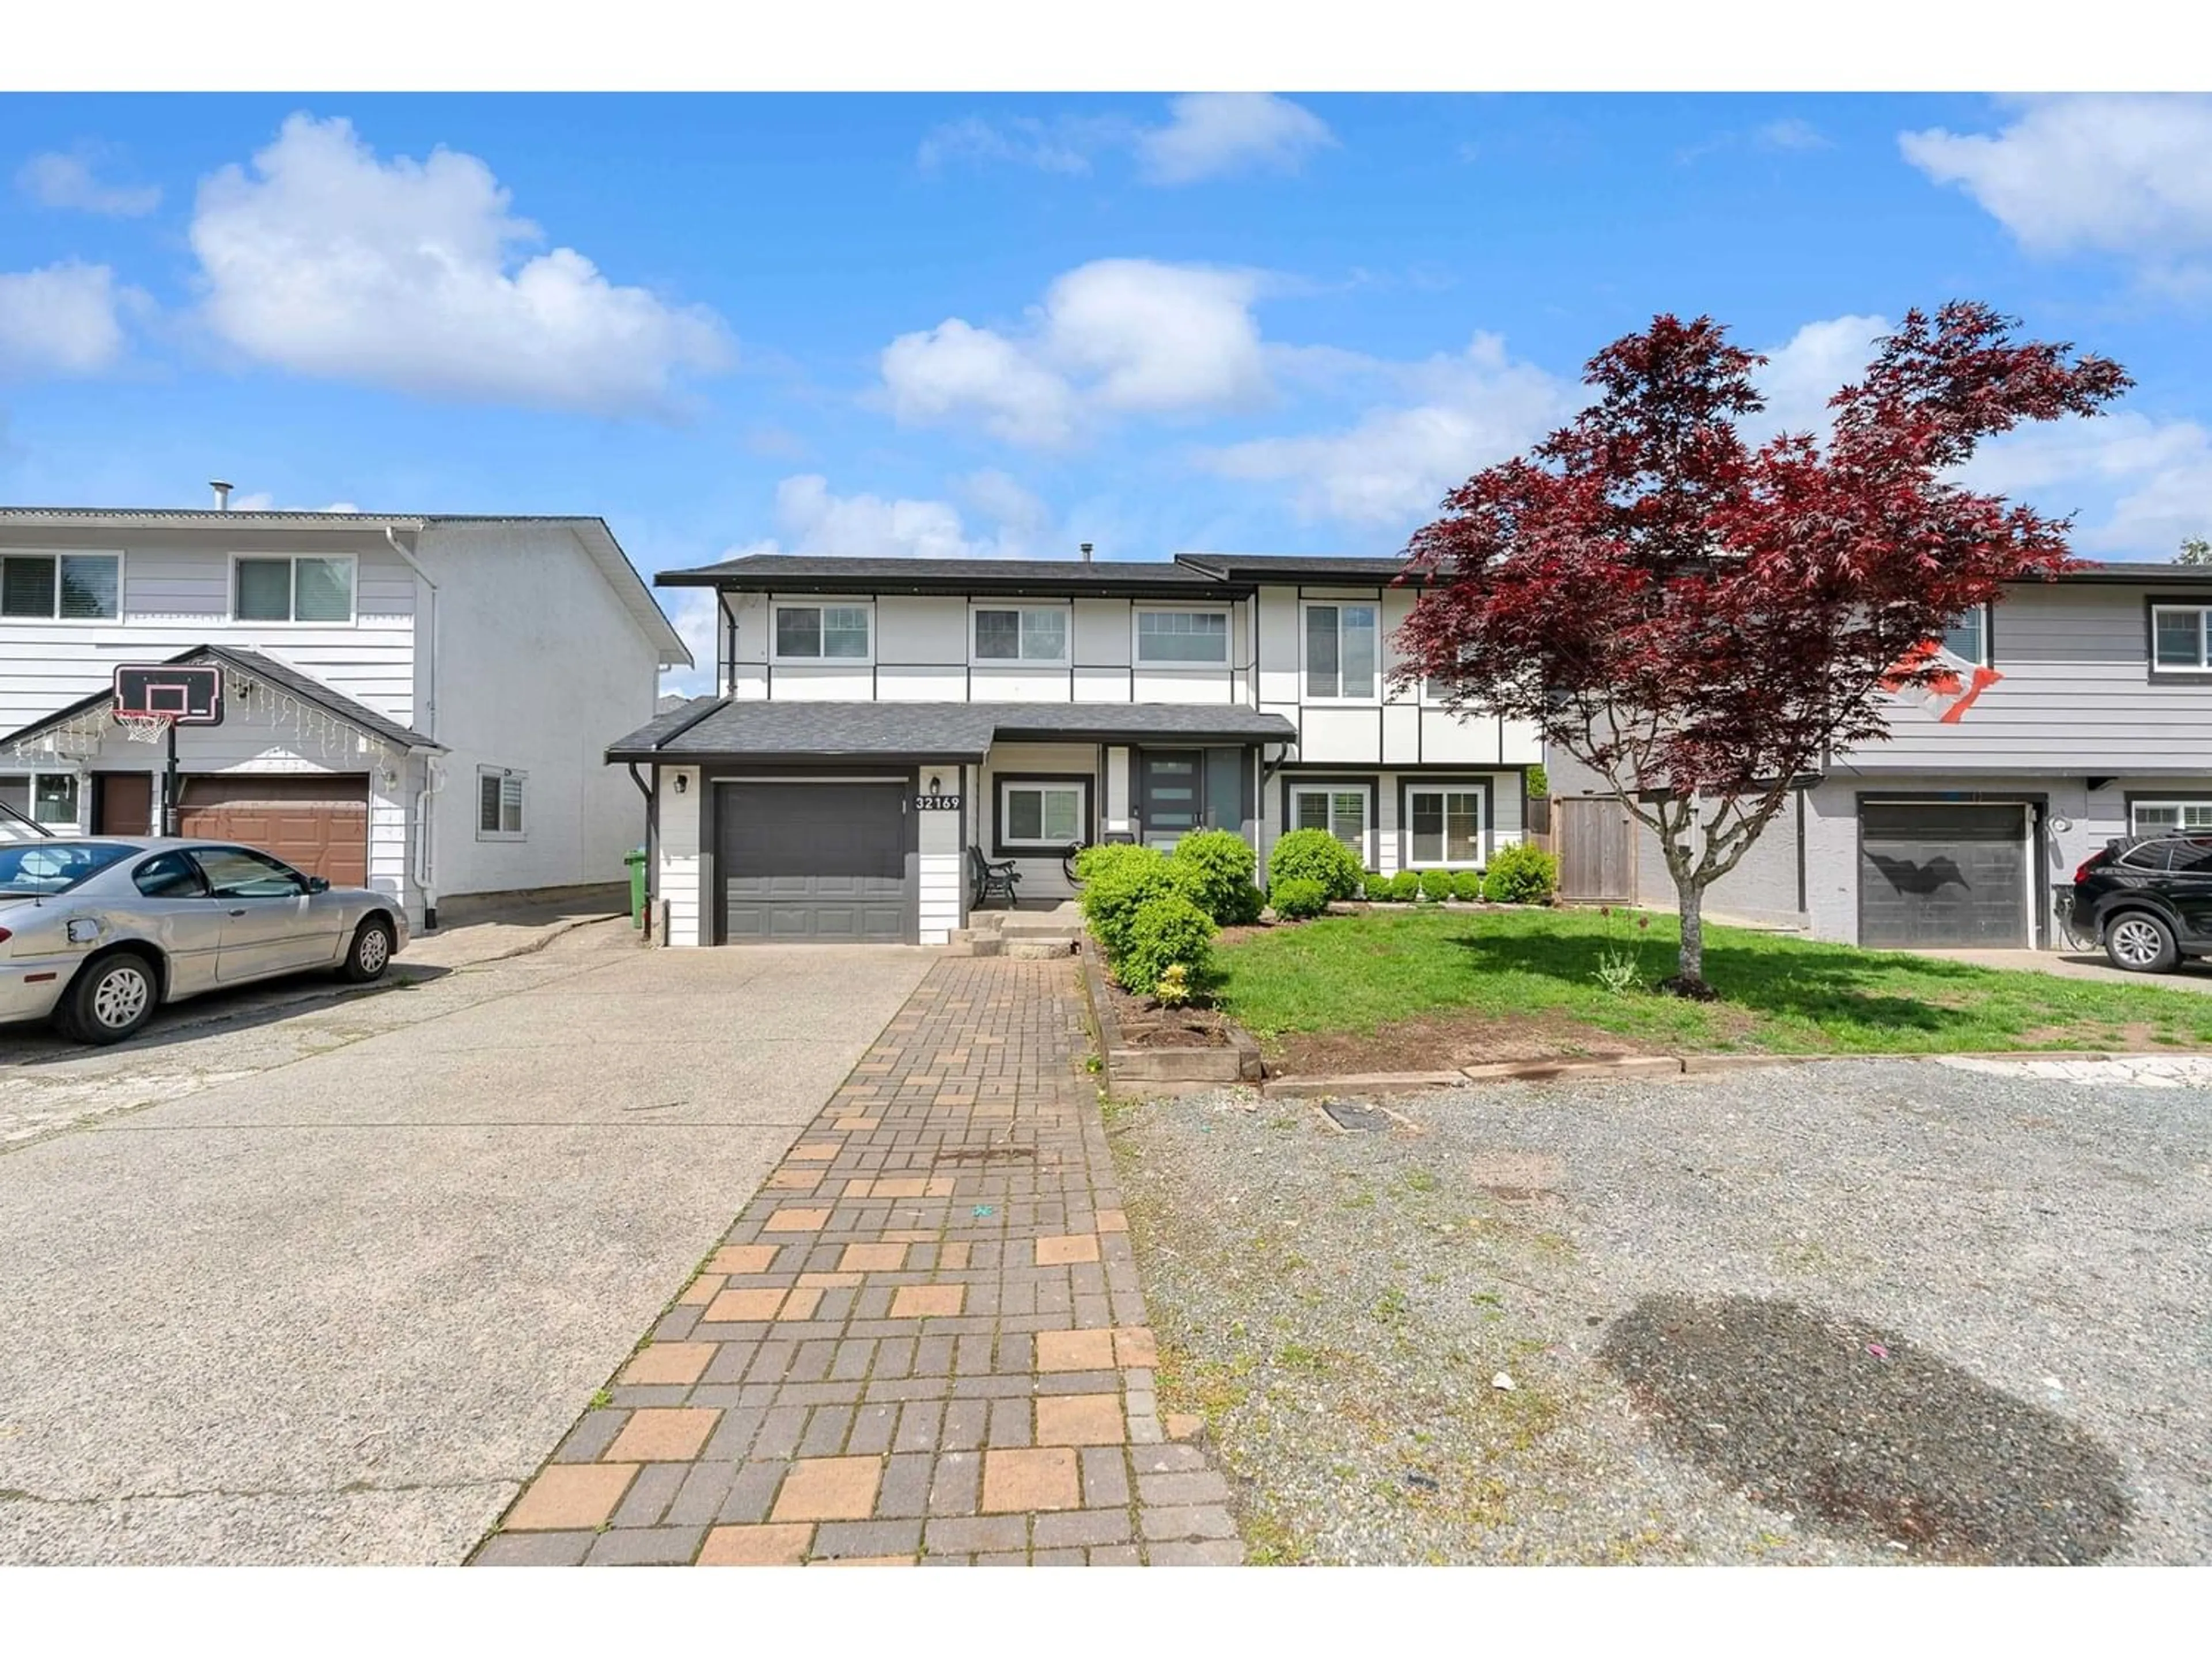 A pic from exterior of the house or condo for 32169 AUSTIN AVENUE, Abbotsford British Columbia V2T4P4